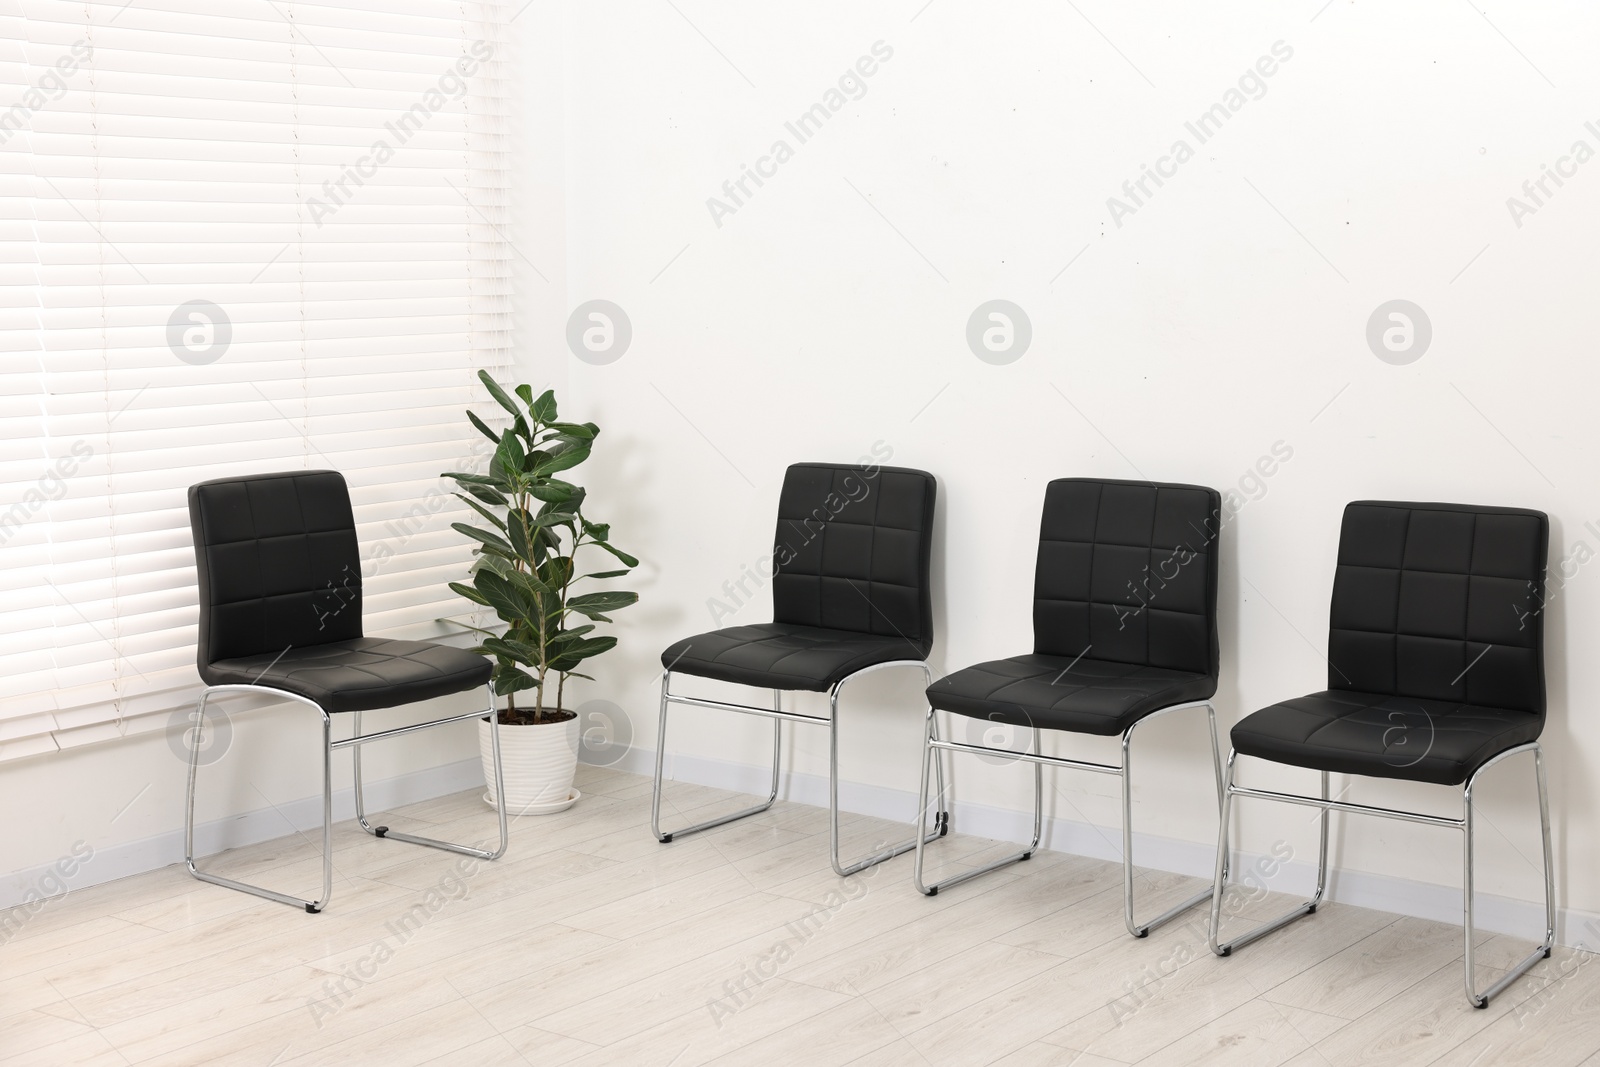 Photo of Many chairs near white wall in waiting area indoors